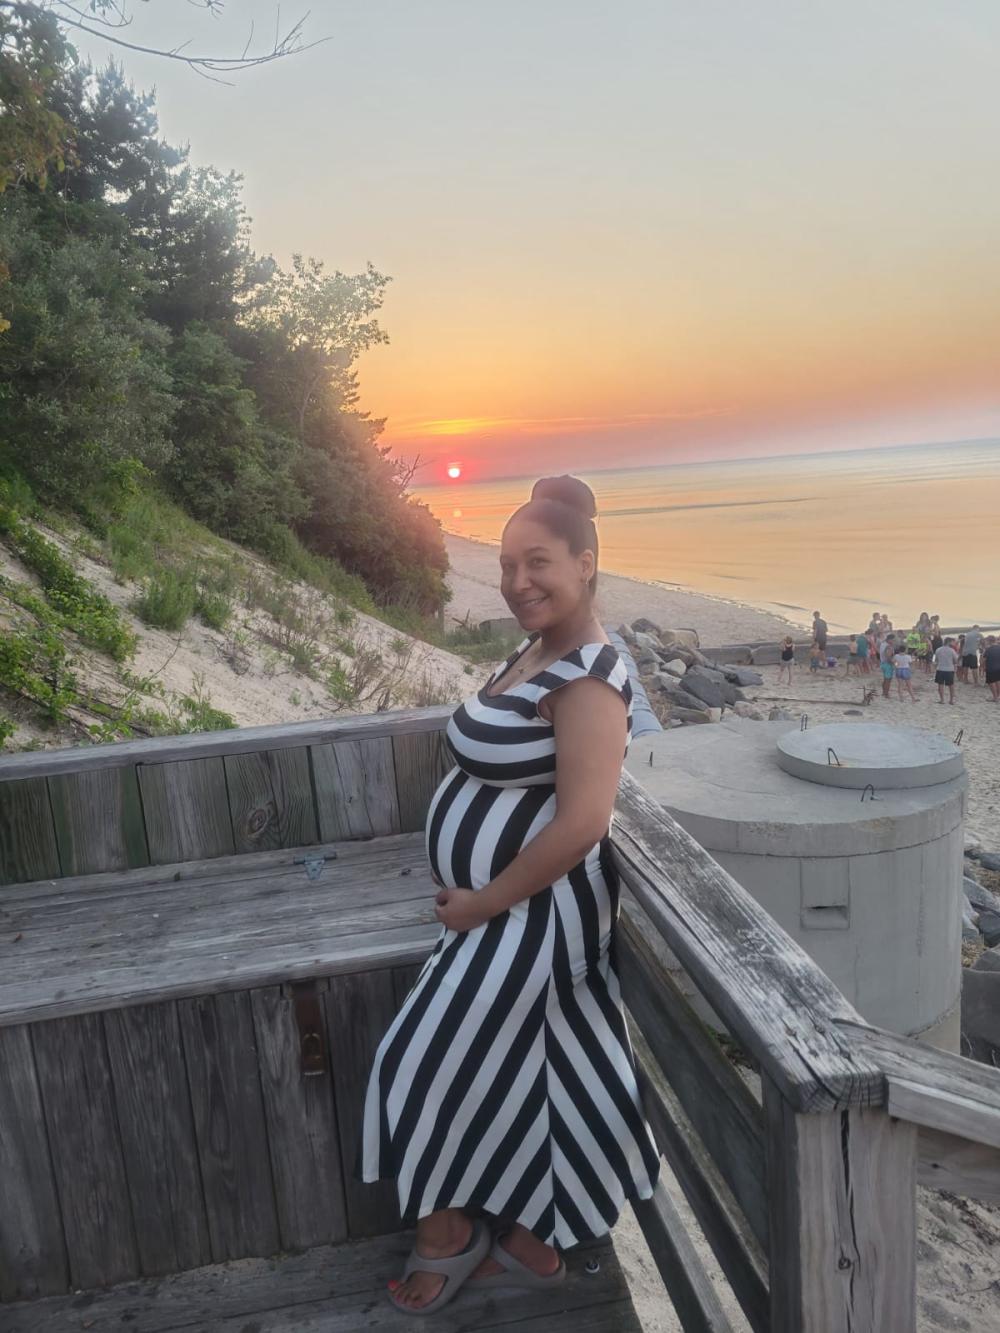 A Visibly Pregnant Yadi Martin Is Photographed on the Beach with the Sun Setting Behind Her